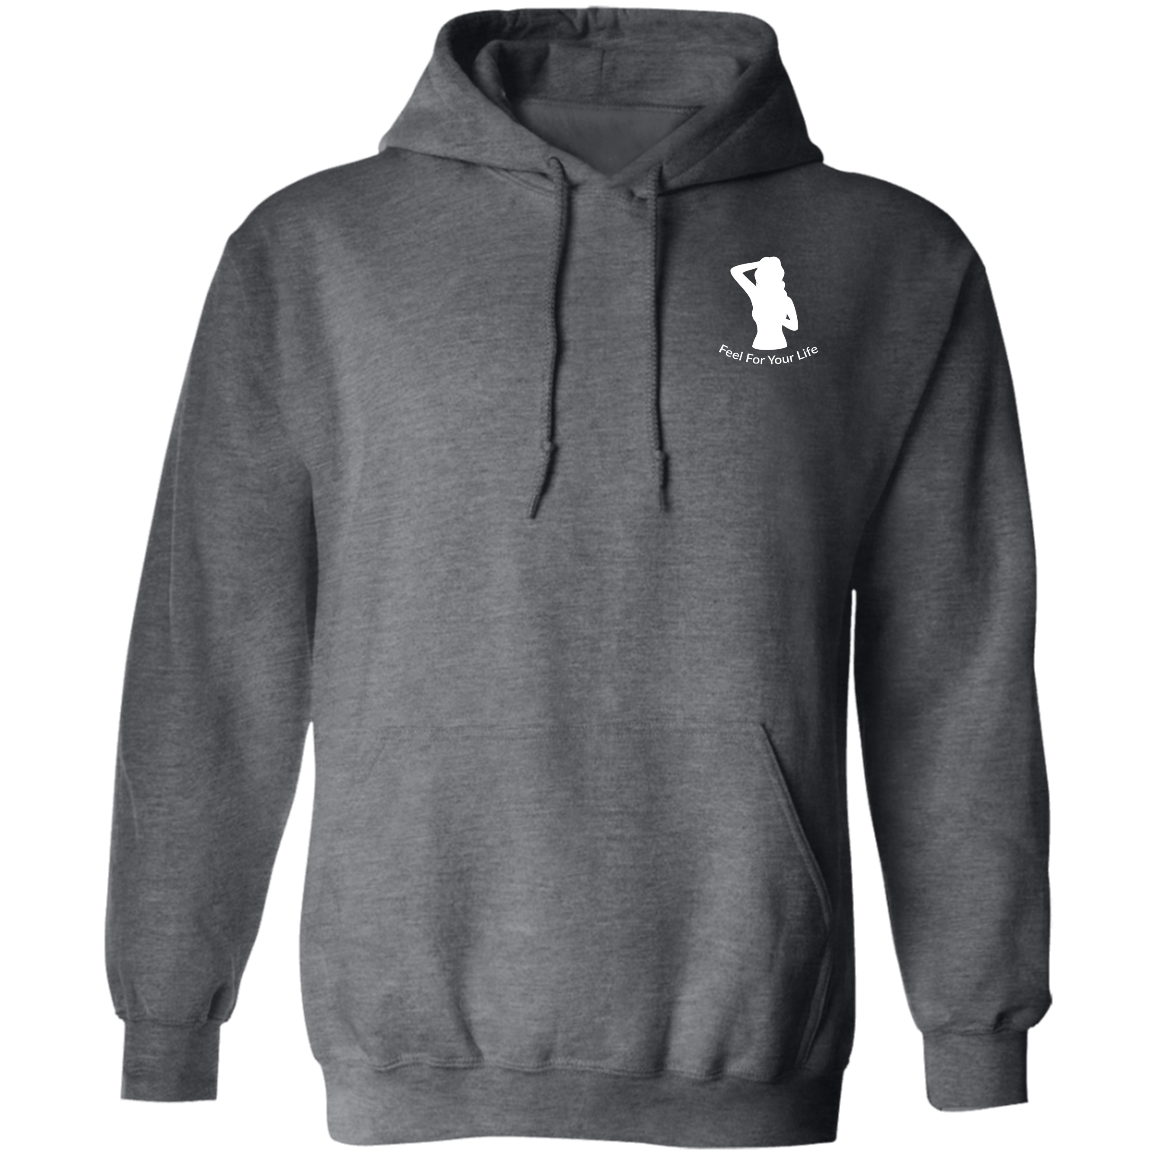 Feel For Your Life Unisex Hoodie Light Gray w/ White Logo Small